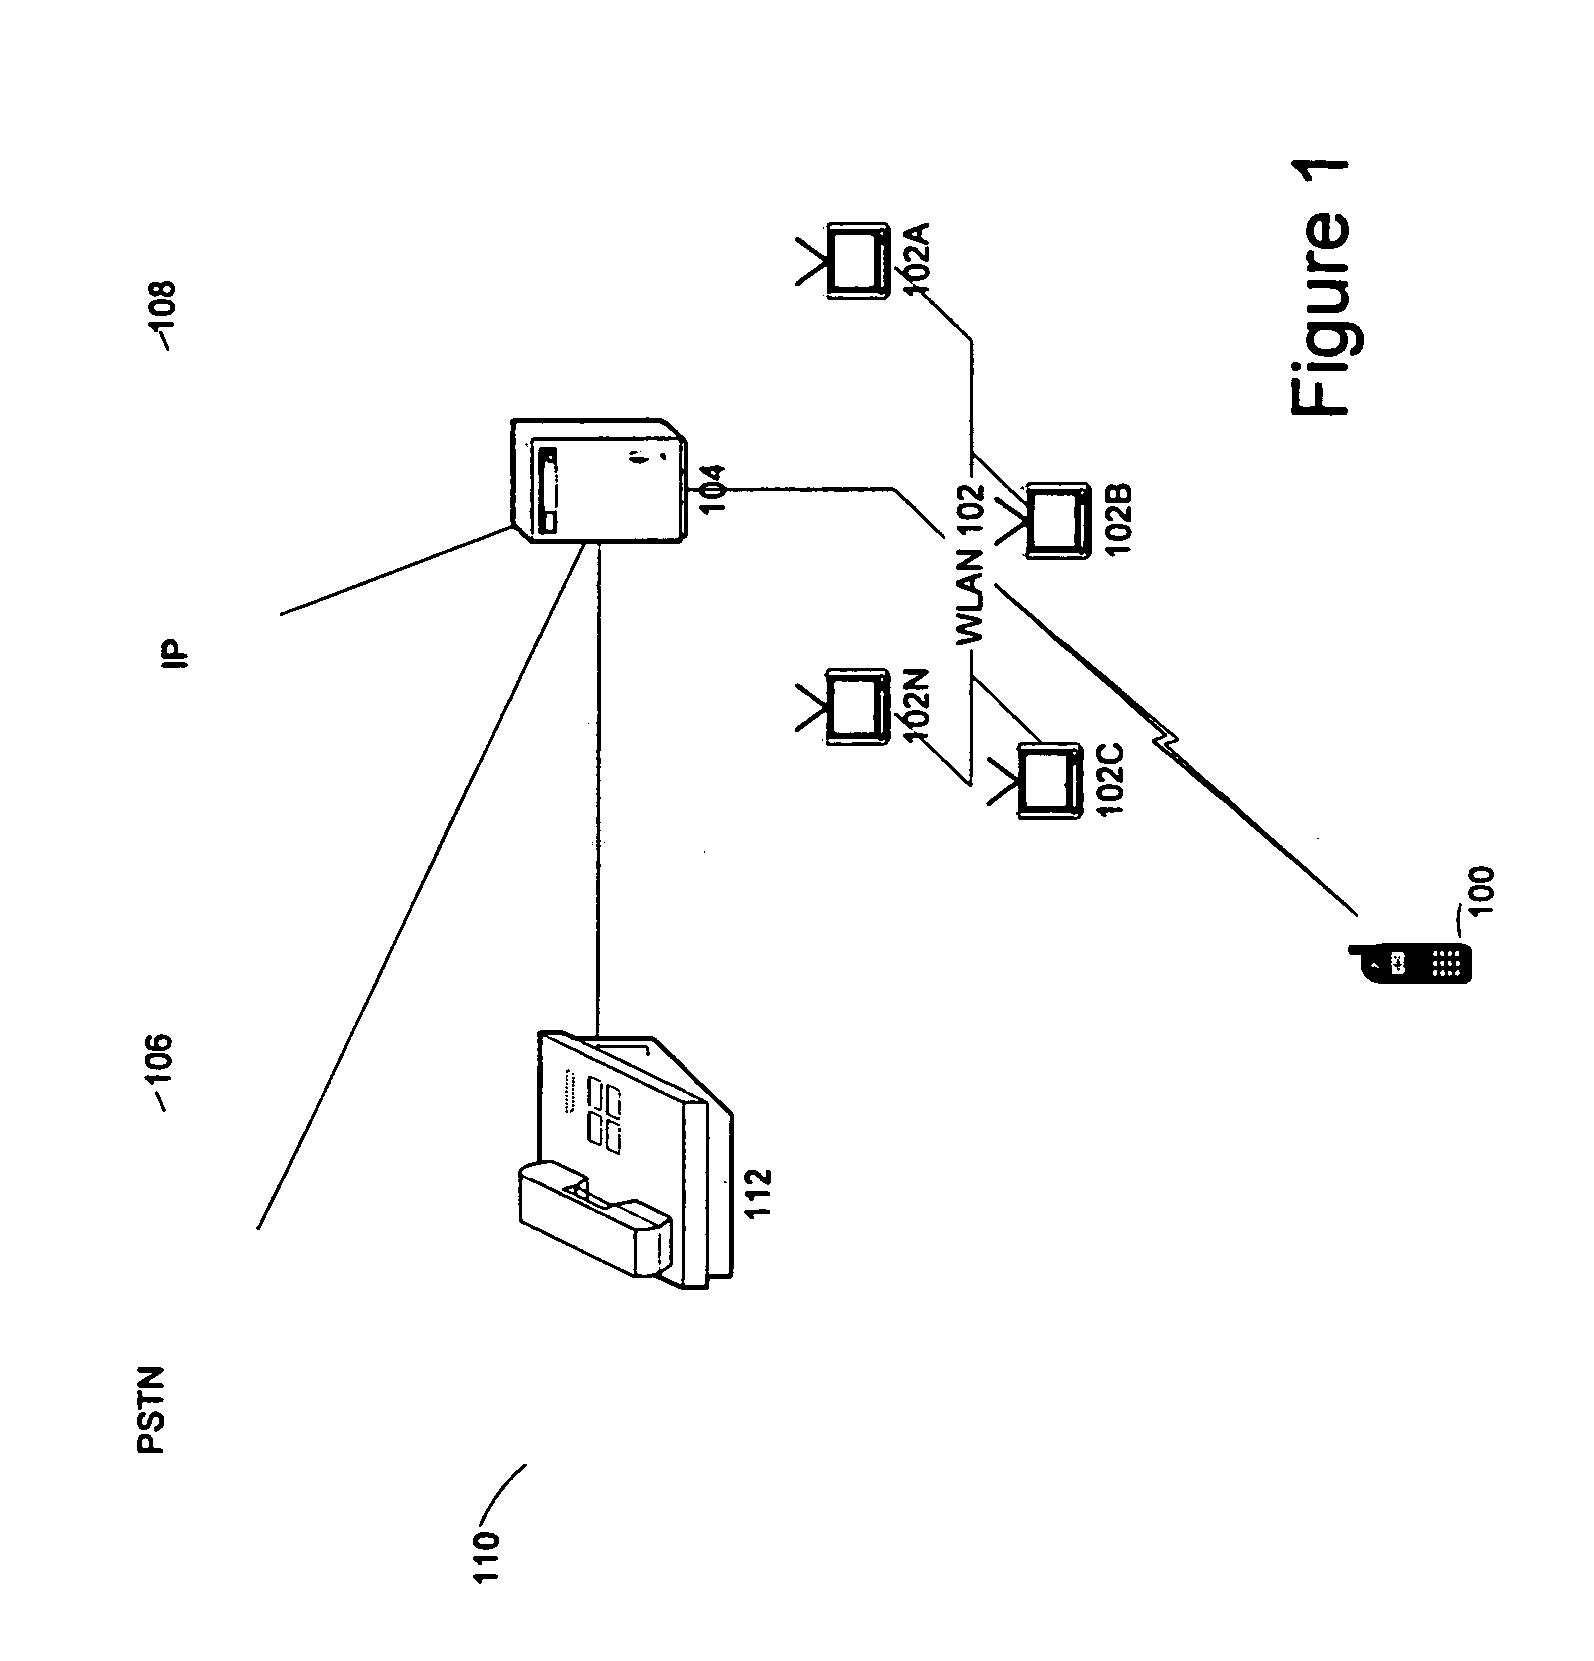 Extension of a local area phone system to a wide area network with handoff features